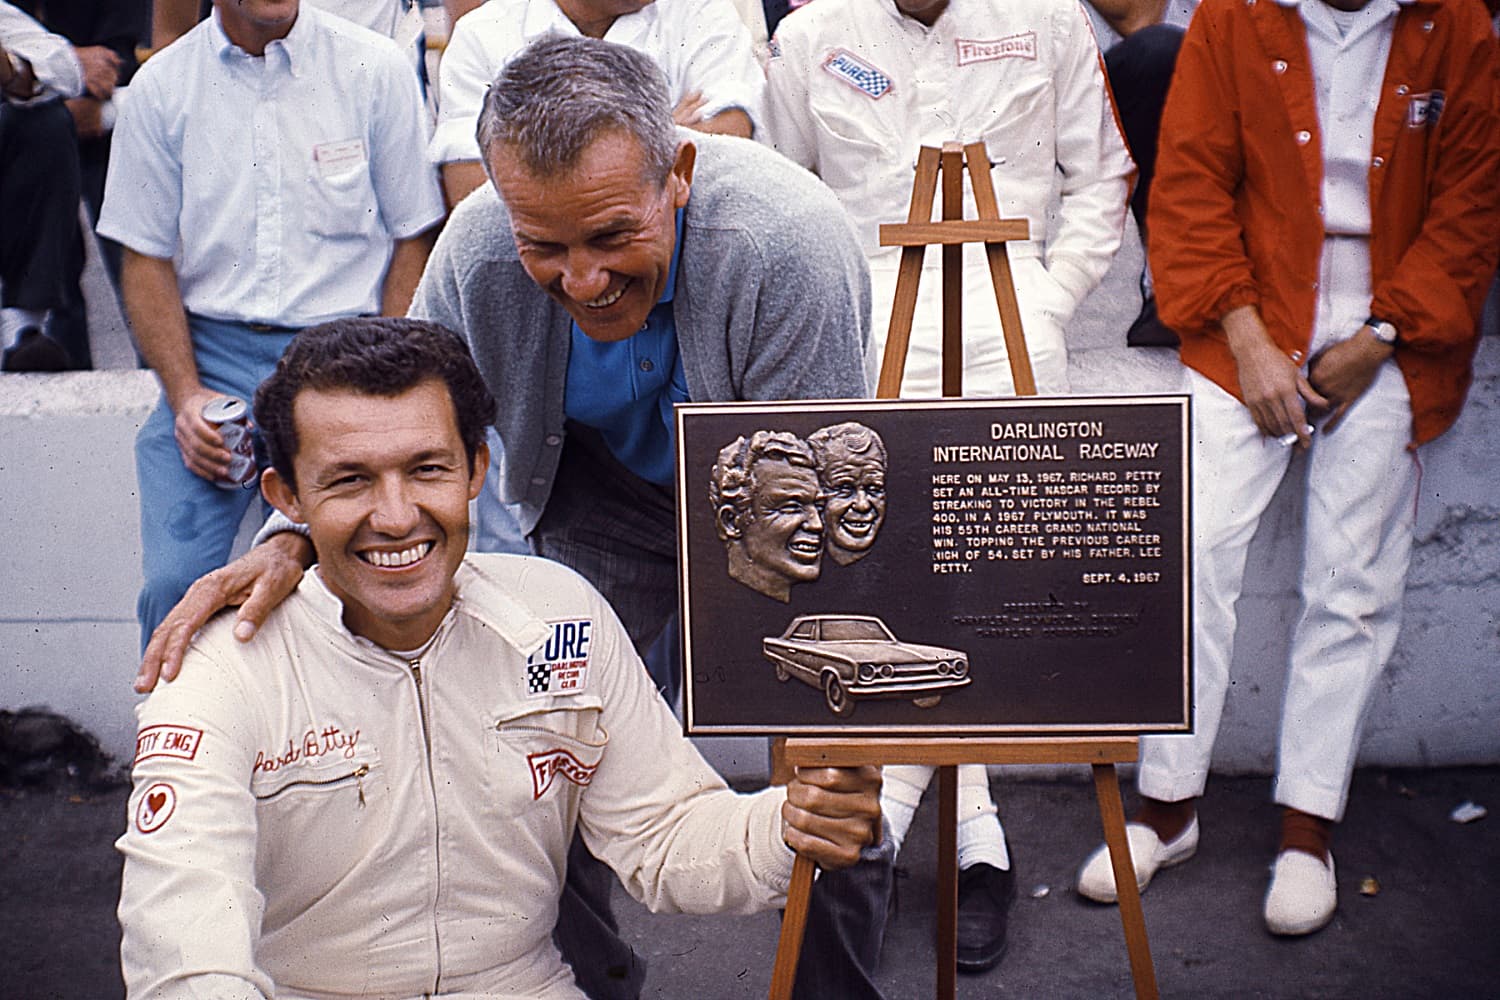 Richard and Lee Petty pose with a plaque presented by Darlington Raceway. It commemorated the younger Petty's 55th career NASCAR Cup win in the Rebel 400 held at Darlington. That victory allowed him to surpass his dad's win total and made them No. 1 and 2 in career NASCAR Cup victories. |  ISC Images & Archives via Getty Images